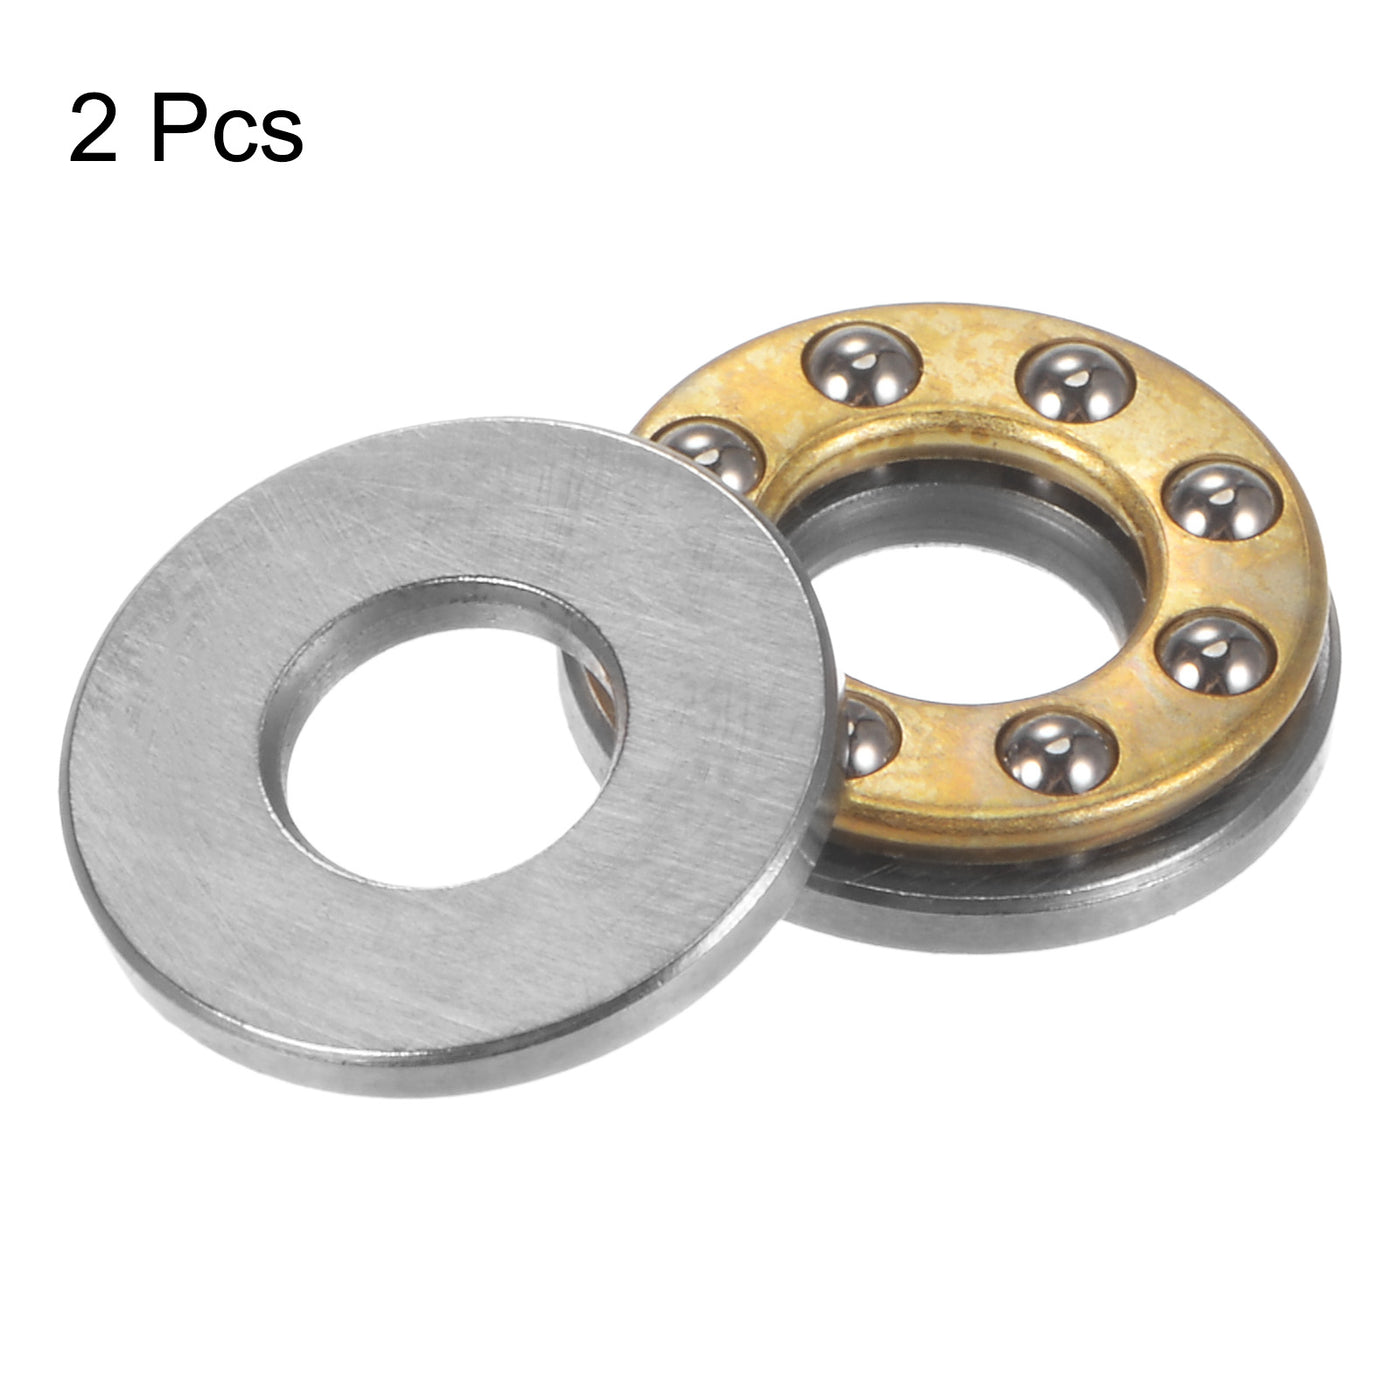 uxcell Uxcell F6-14M Thrust Ball Bearing 6x14x5mm Brass with Washers ABEC3 2pcs